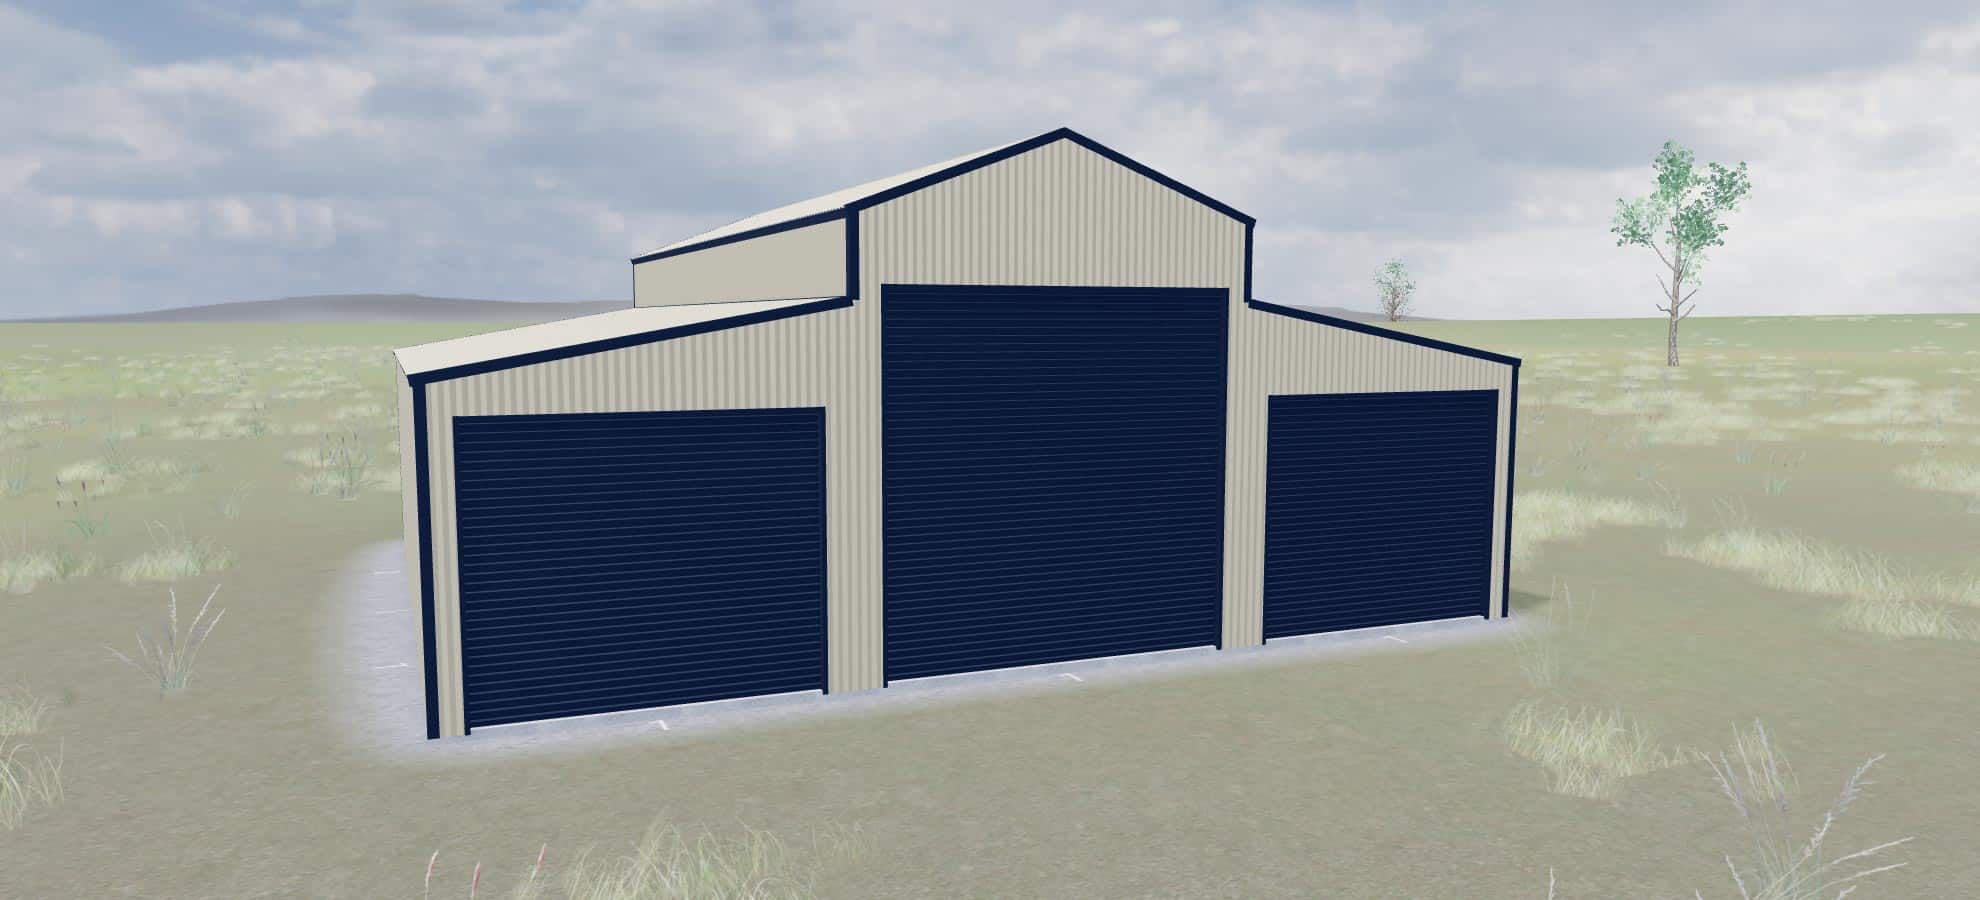 Render of an American style Barn